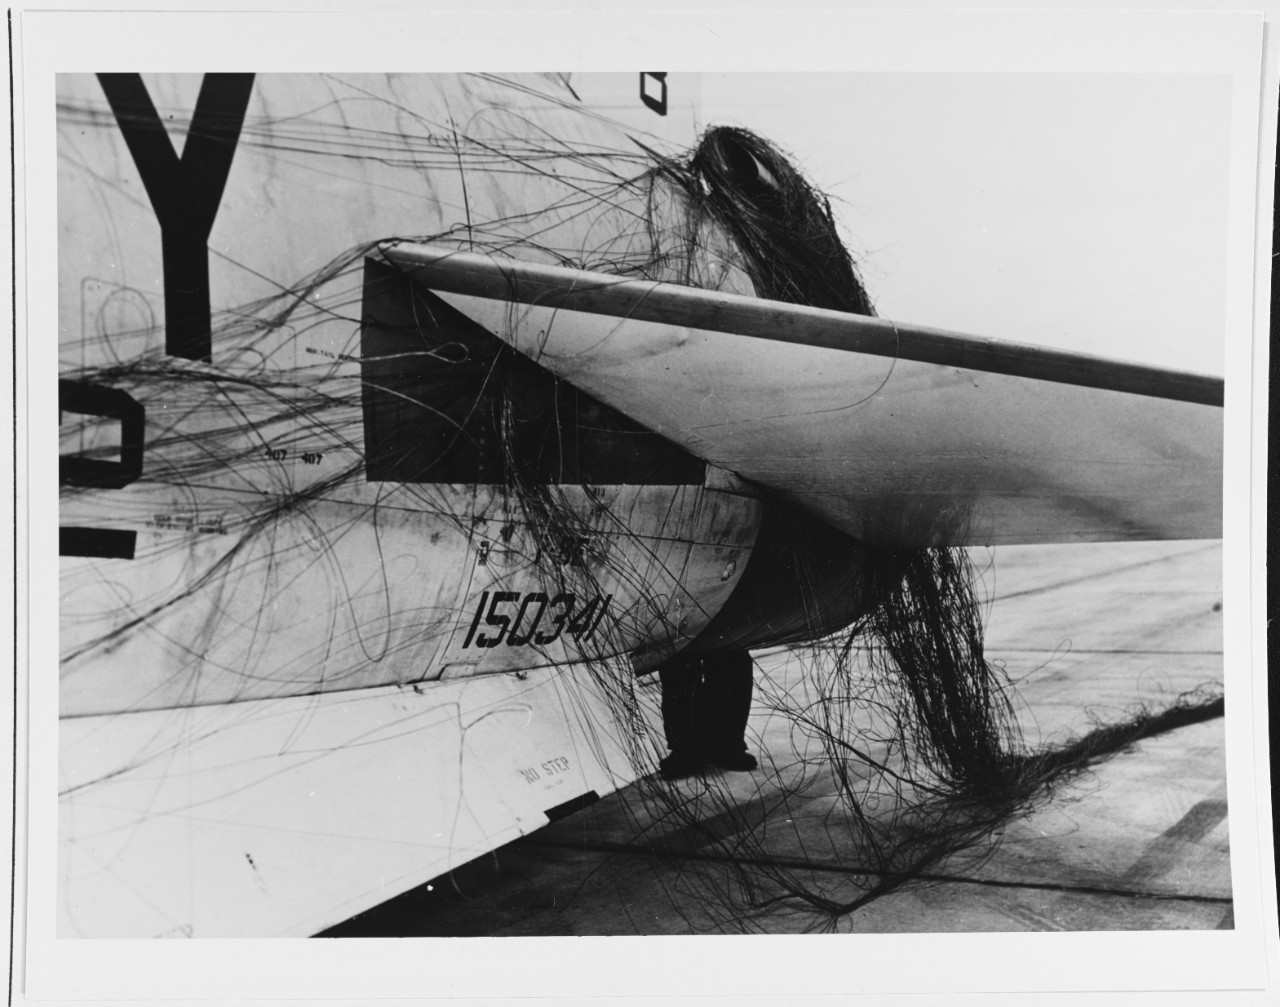 Tow target cable fouled by aircraft of VF-62, 1965.